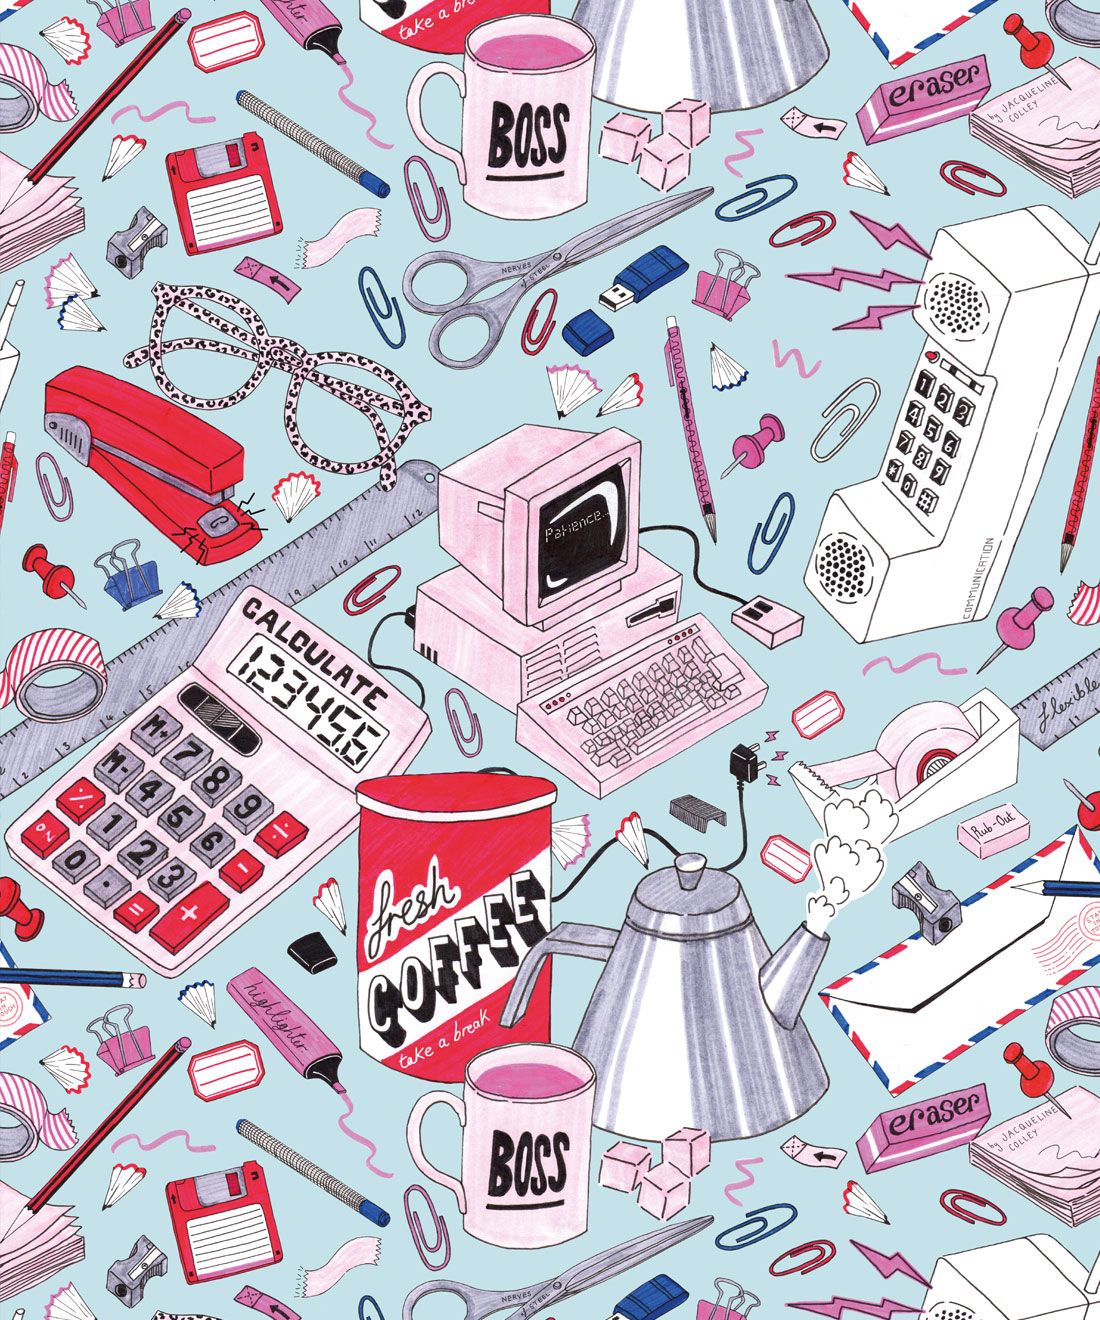 1980's Office Wallpaper featuring calculators, staplers, computers, phones on a messy desk • retro wallpaper